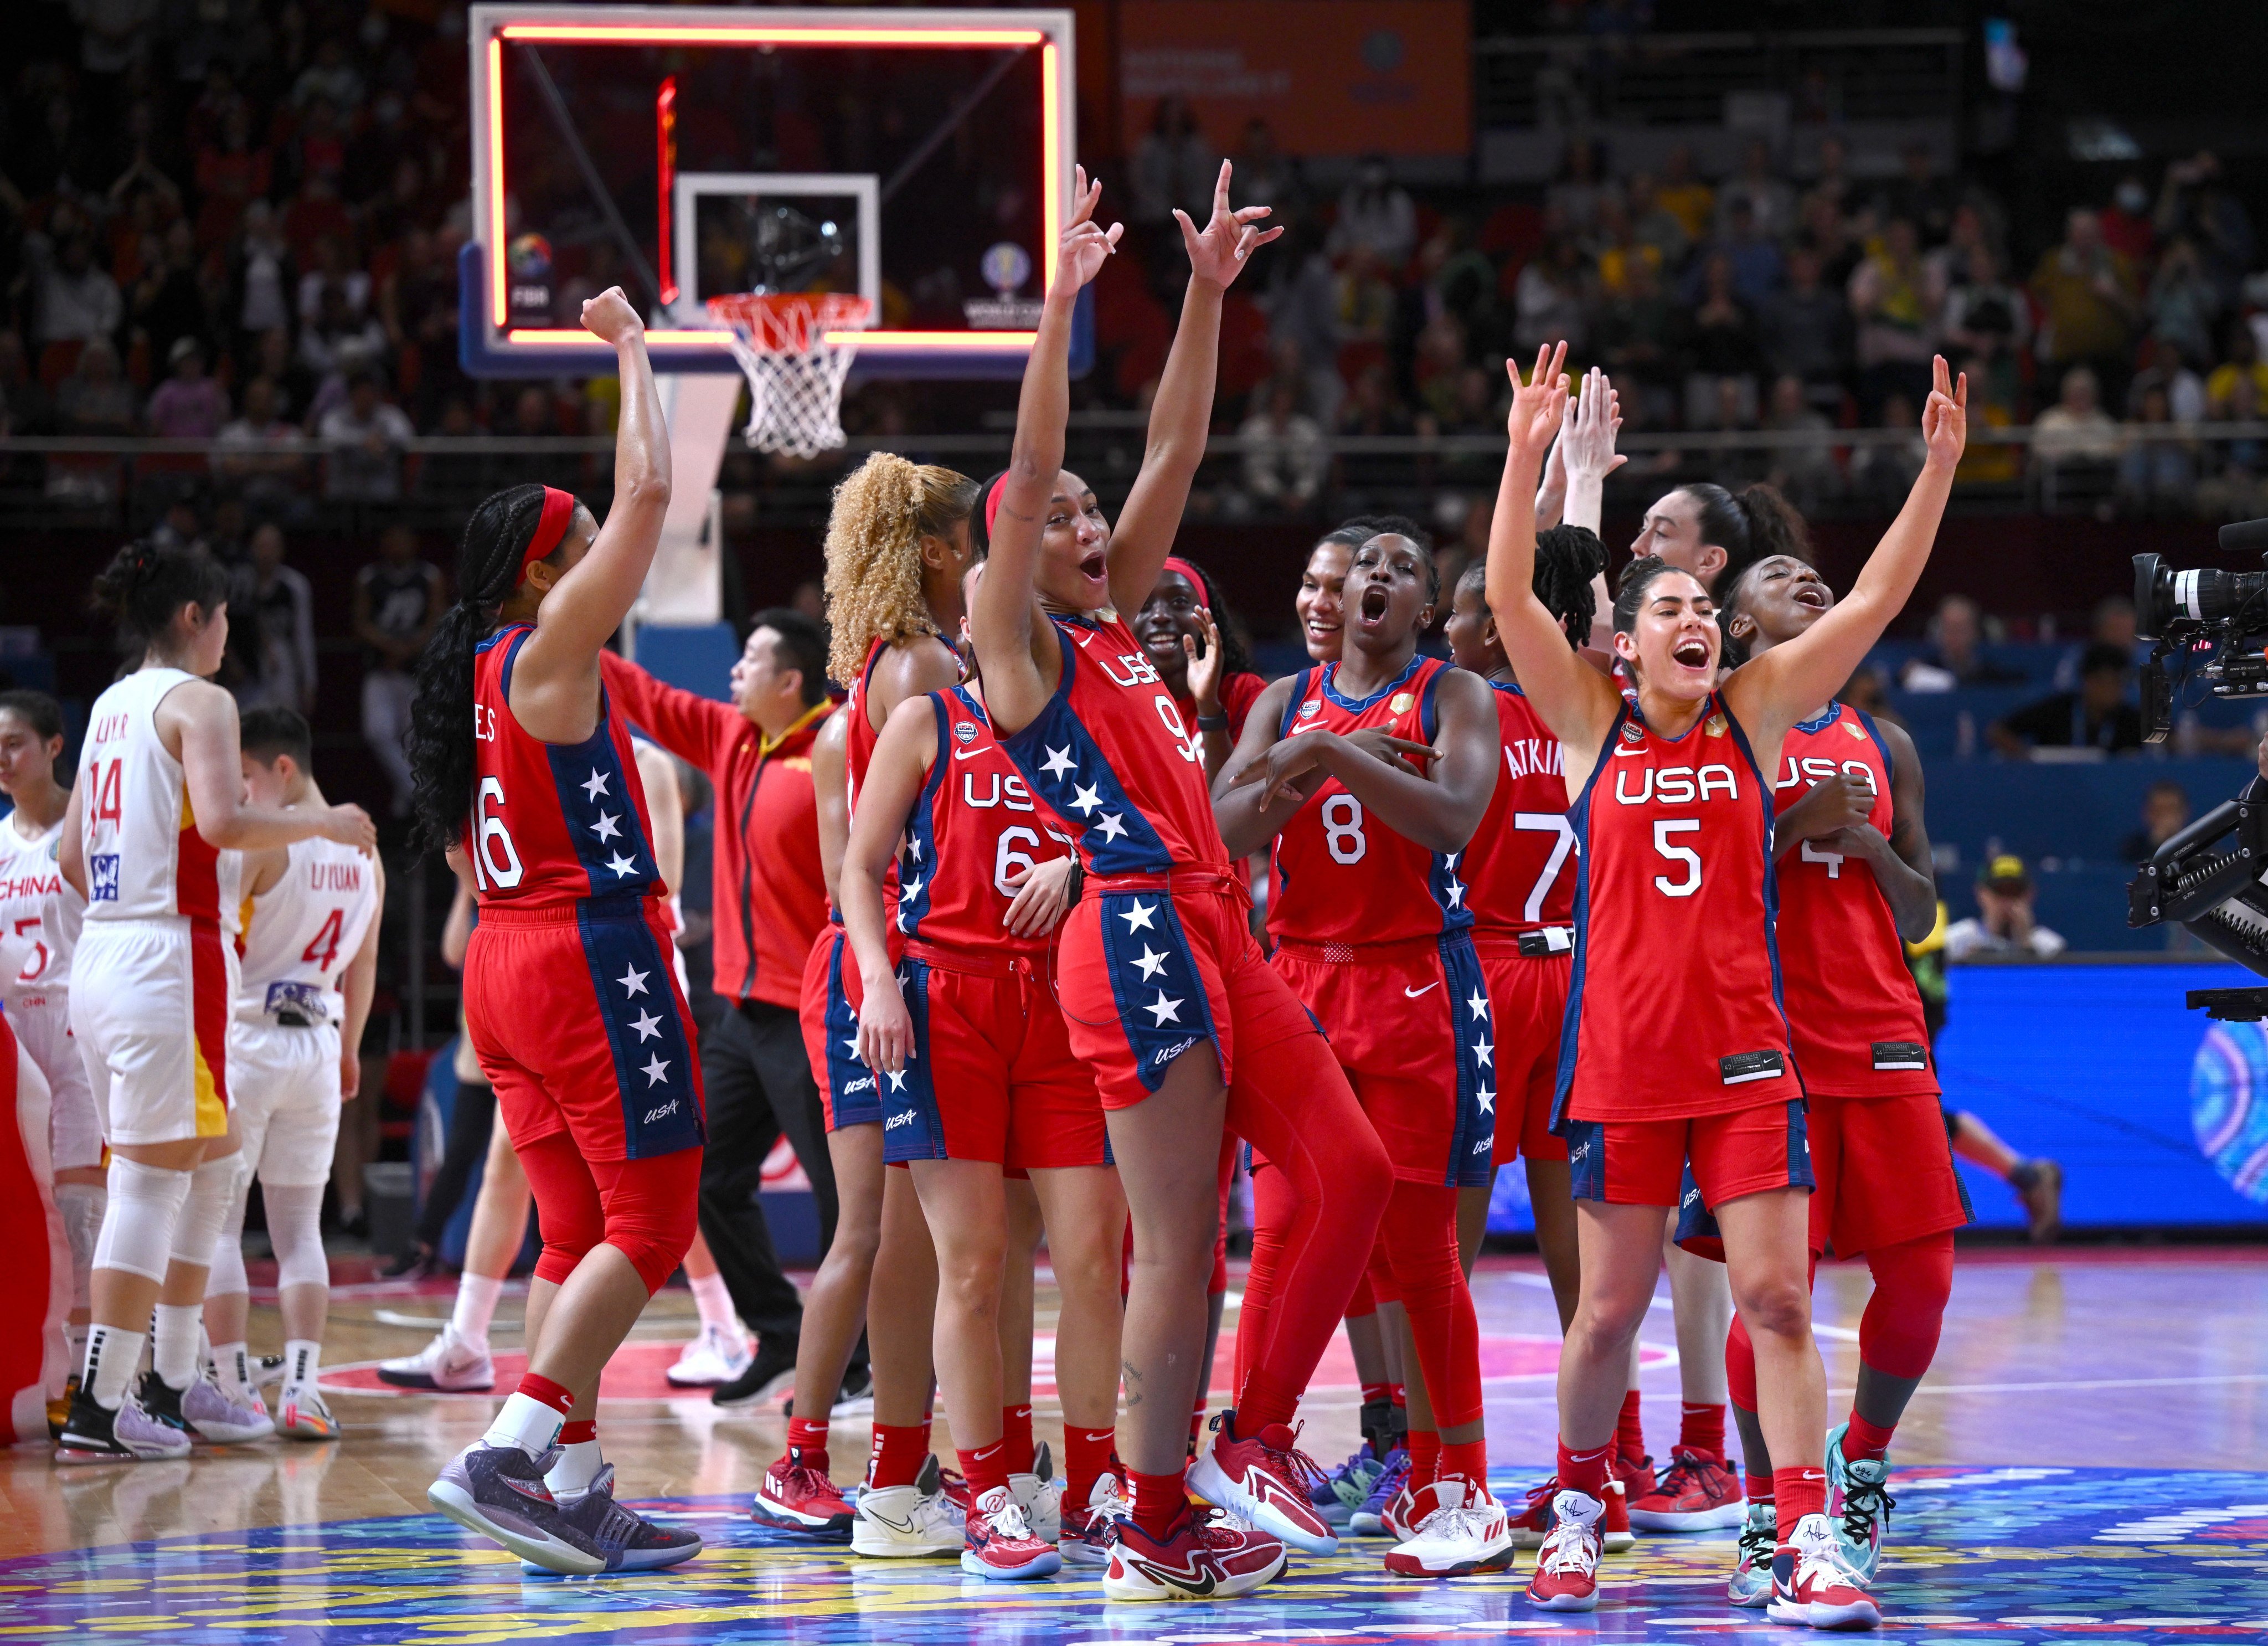 US players celebrate winning the FIBA Women’s Basketball World Cup after the gold medal match against China. Photo: EPA-EFE